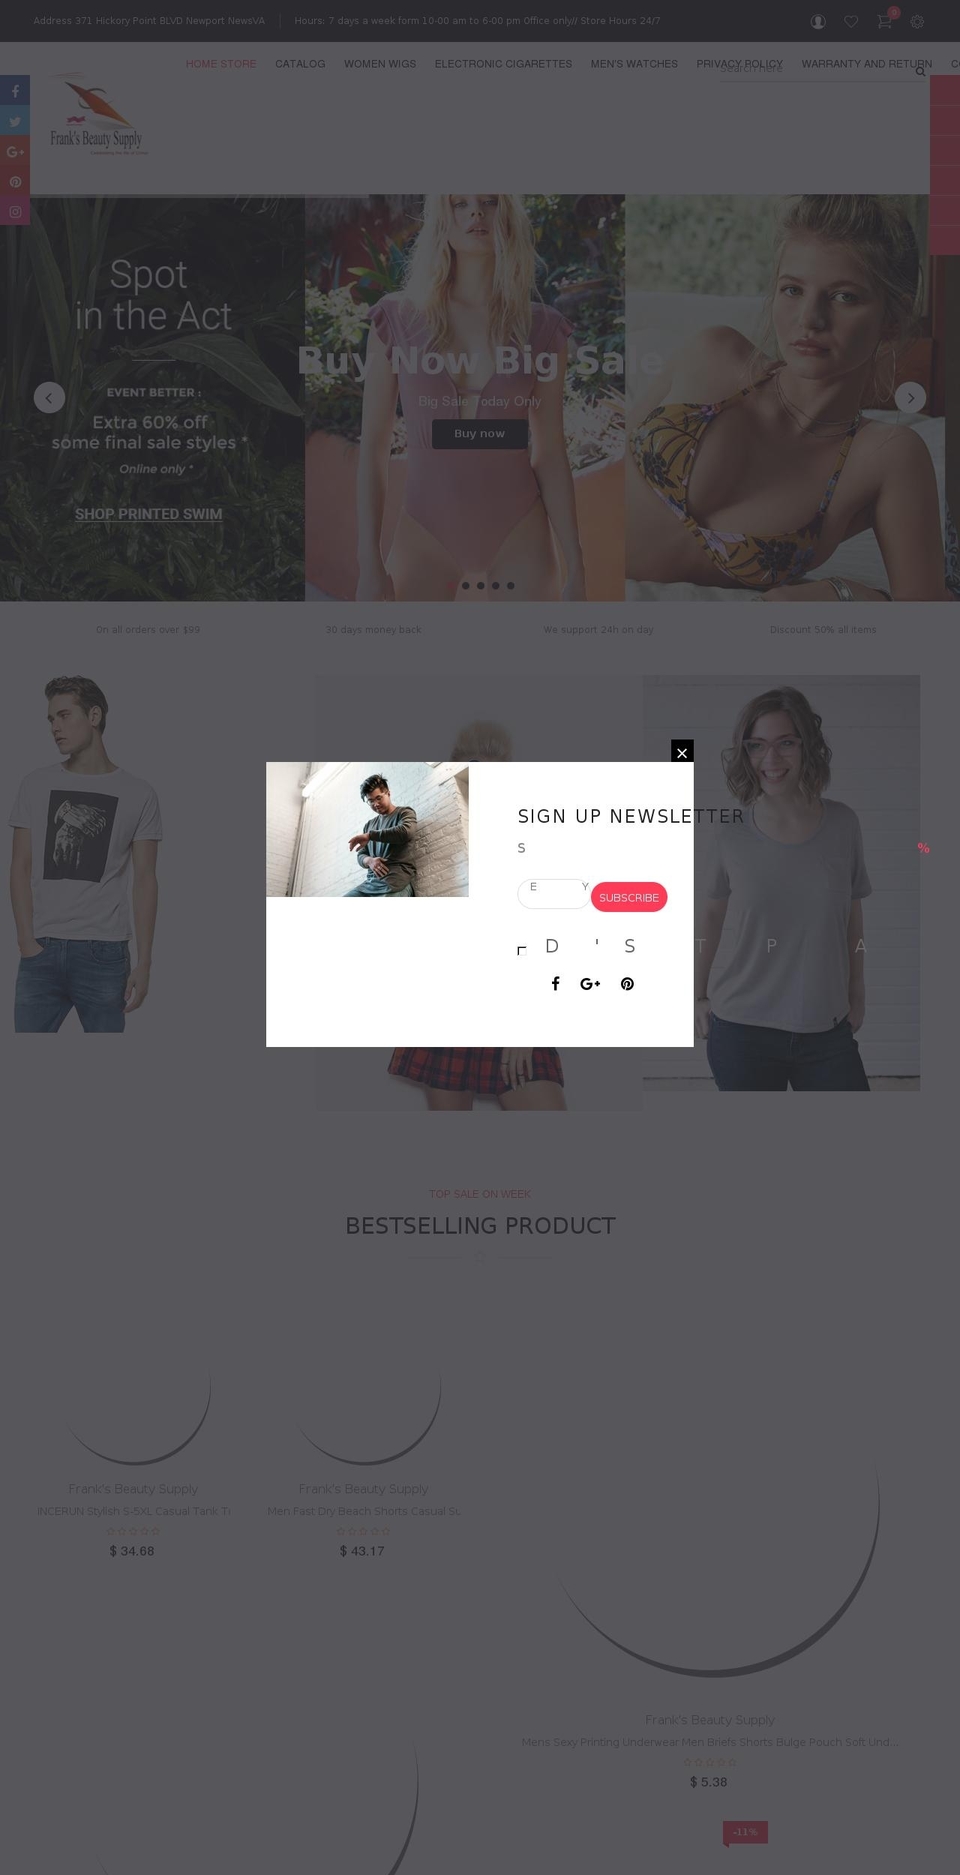 Copy of Pop Shopify theme site example cheapwigsbuy.com